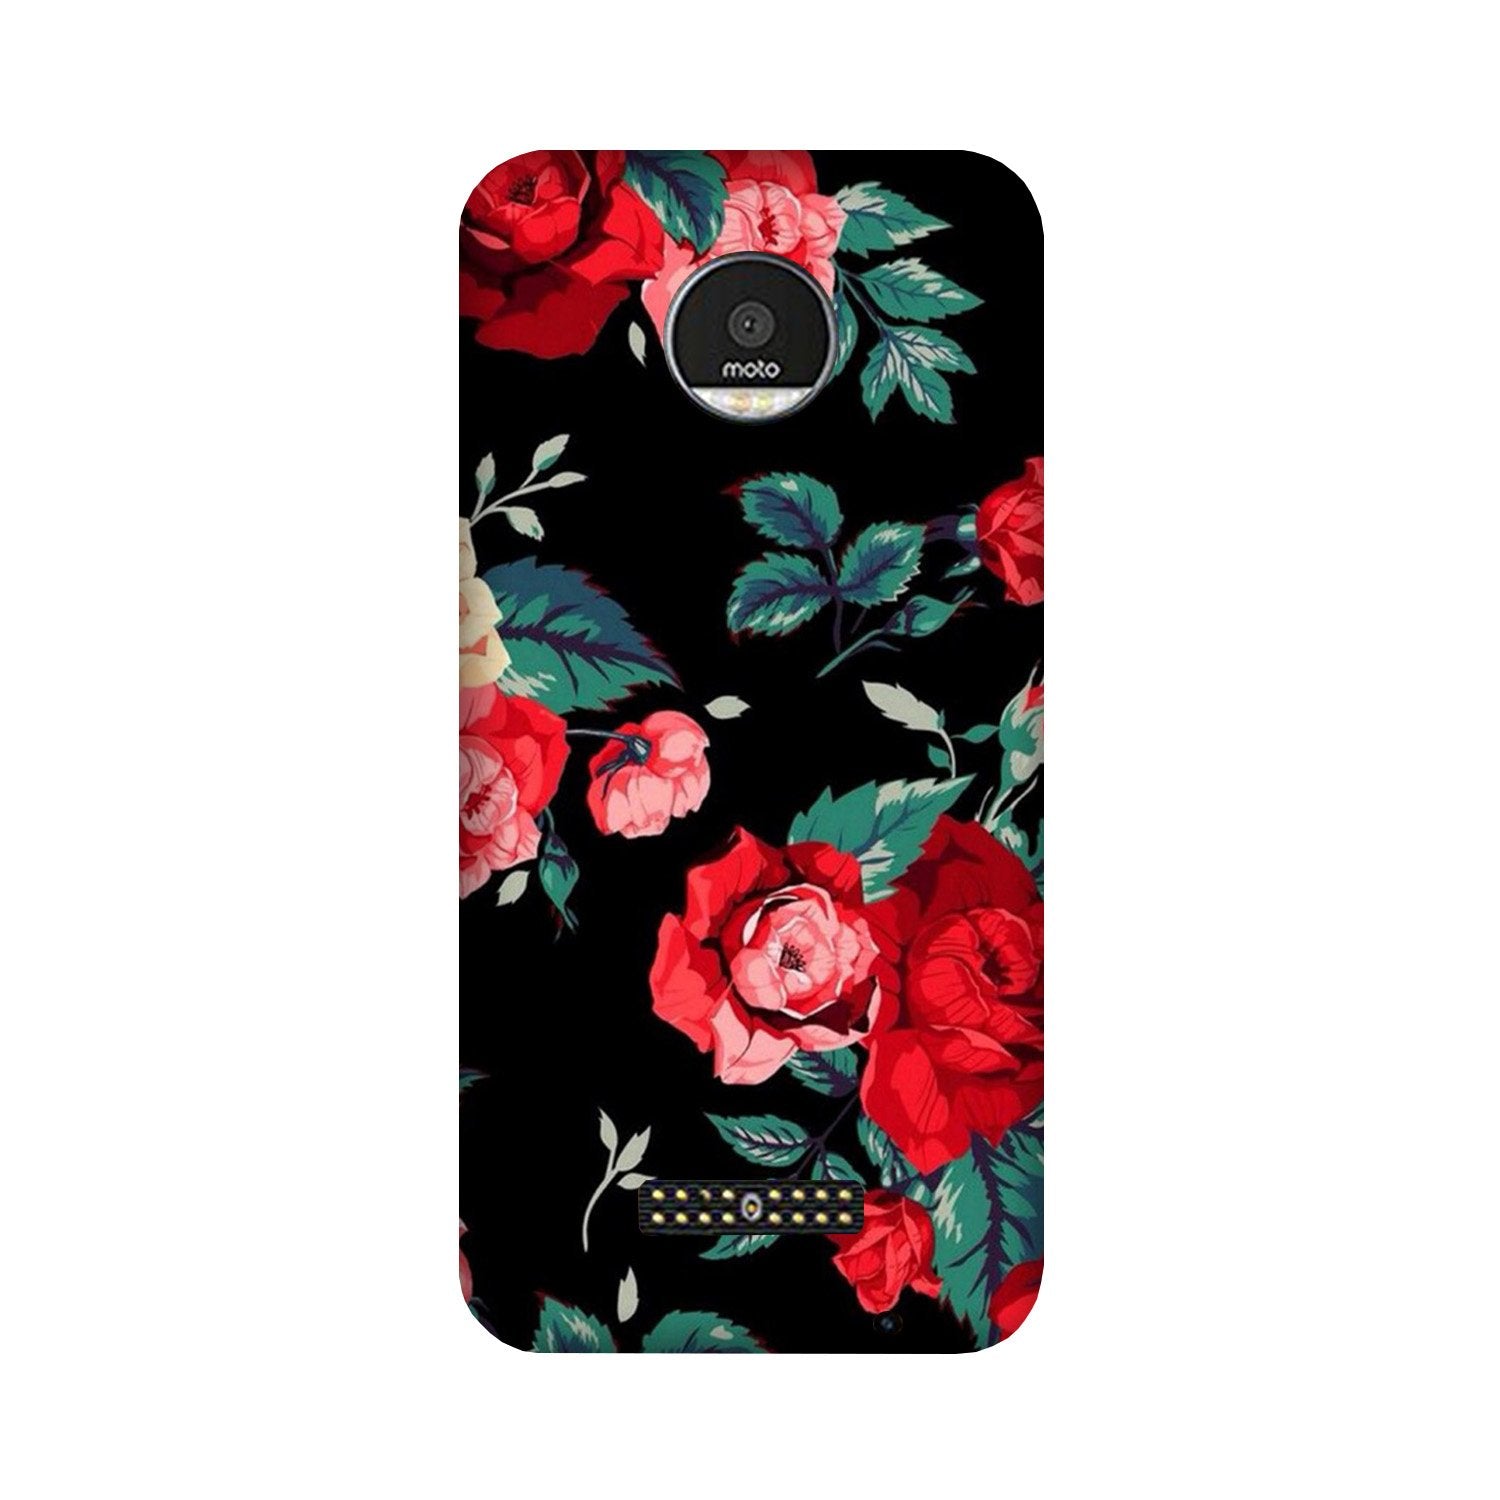 Red Rose2 Case for Moto Z2 Play